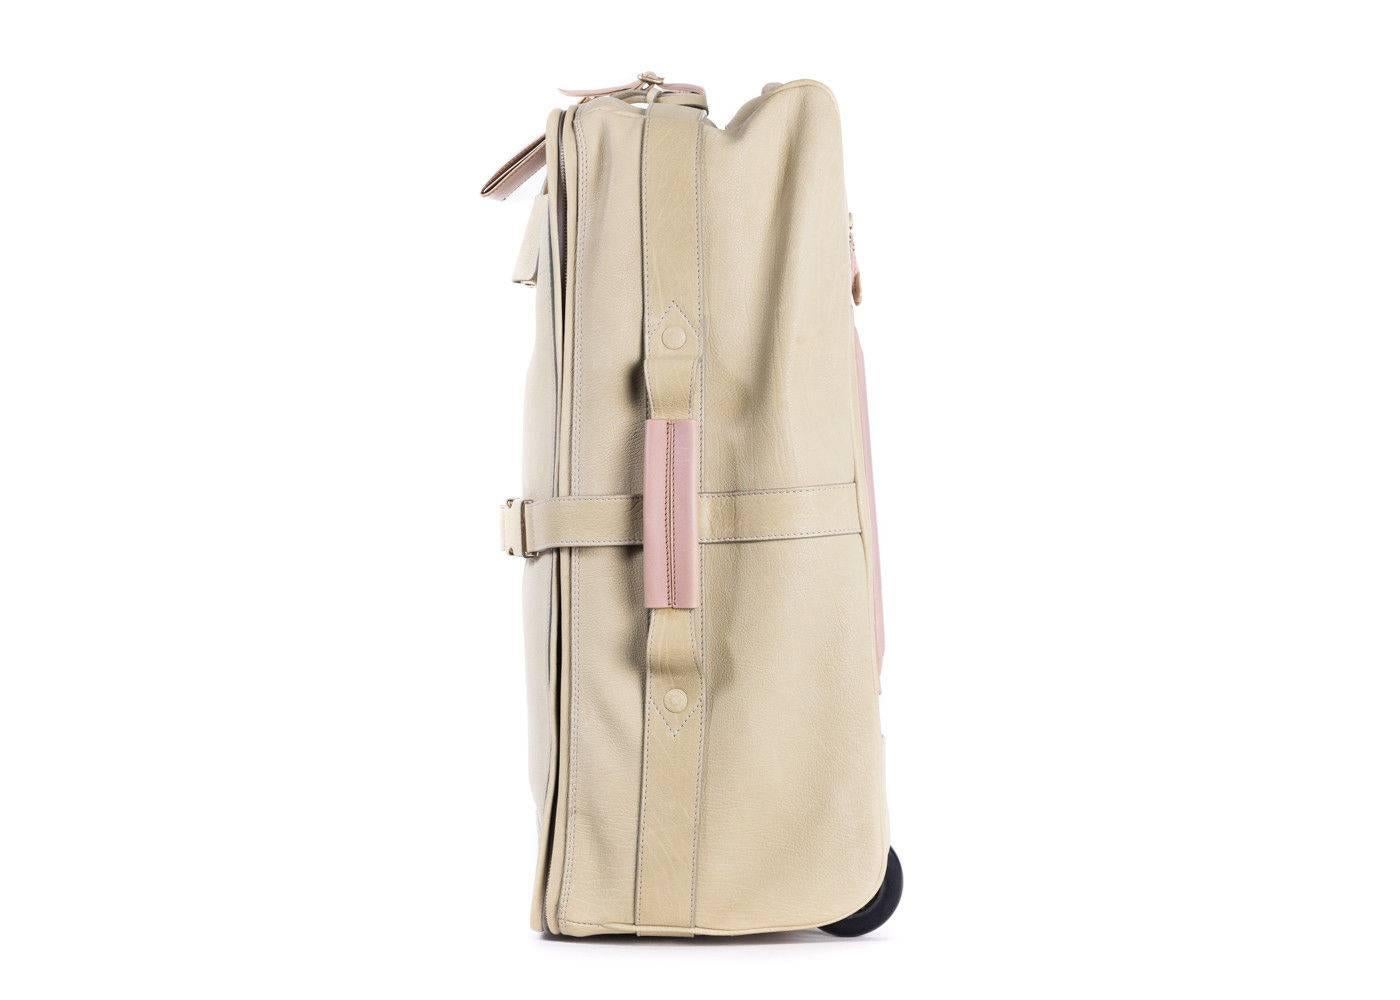 Brand New Brunello Cucinelli Messenger Bag
Dust Bag Included
Retails in Stores & Online for $4895
Dimensions: 15